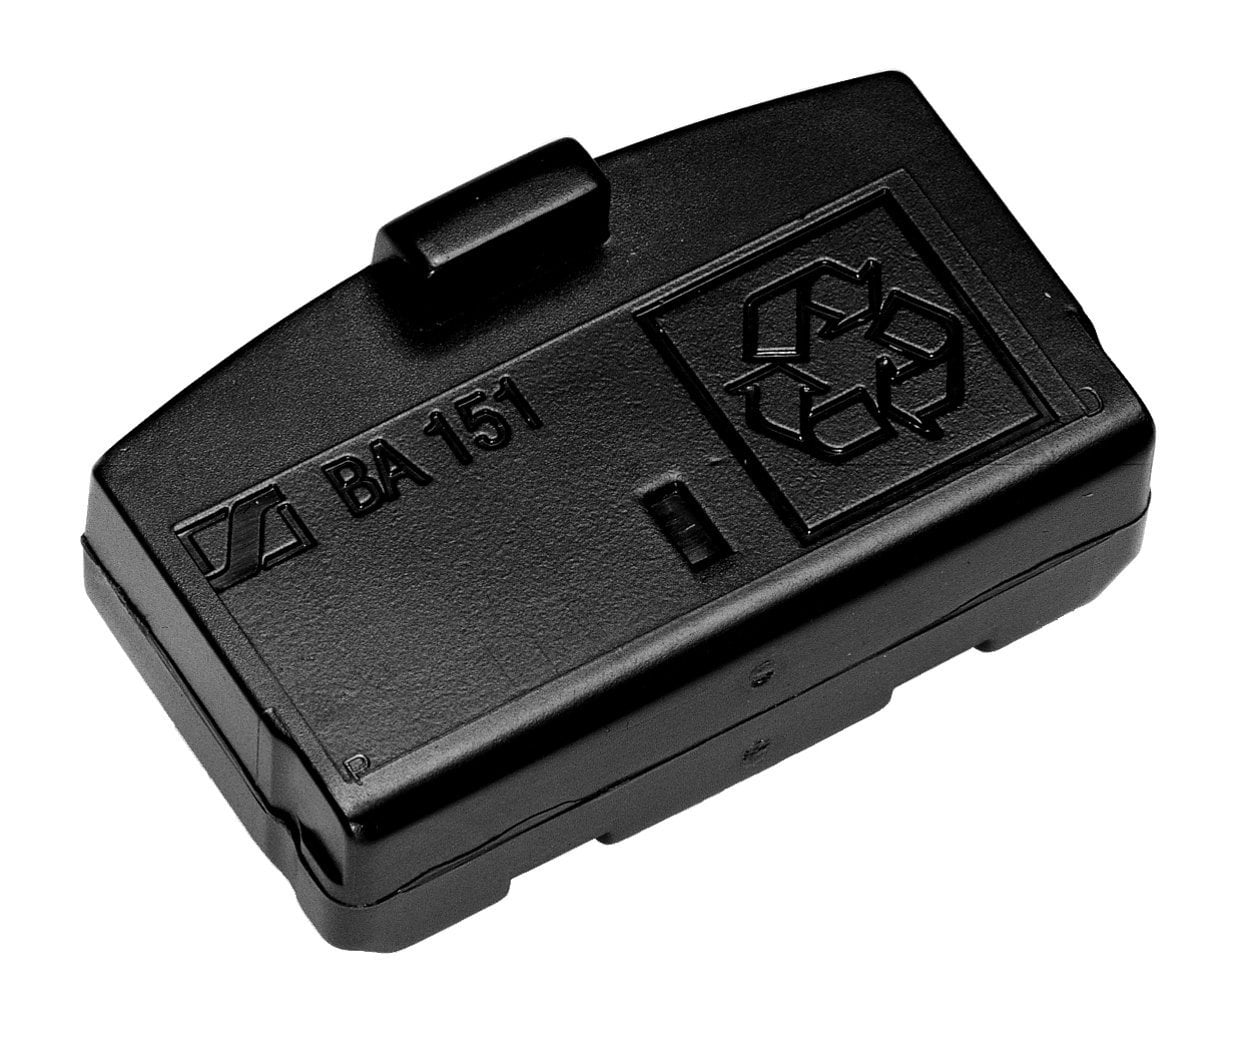 Briesje cache Uitschakelen BA 151 Rechargeable Battery for IR and RF Wireless Headsets, Rechargeable  accupack suitable for: IS 150, IS 300, Set 810, Set 250, Set 500, IS.., By  Sennheiser From USA - Walmart.com